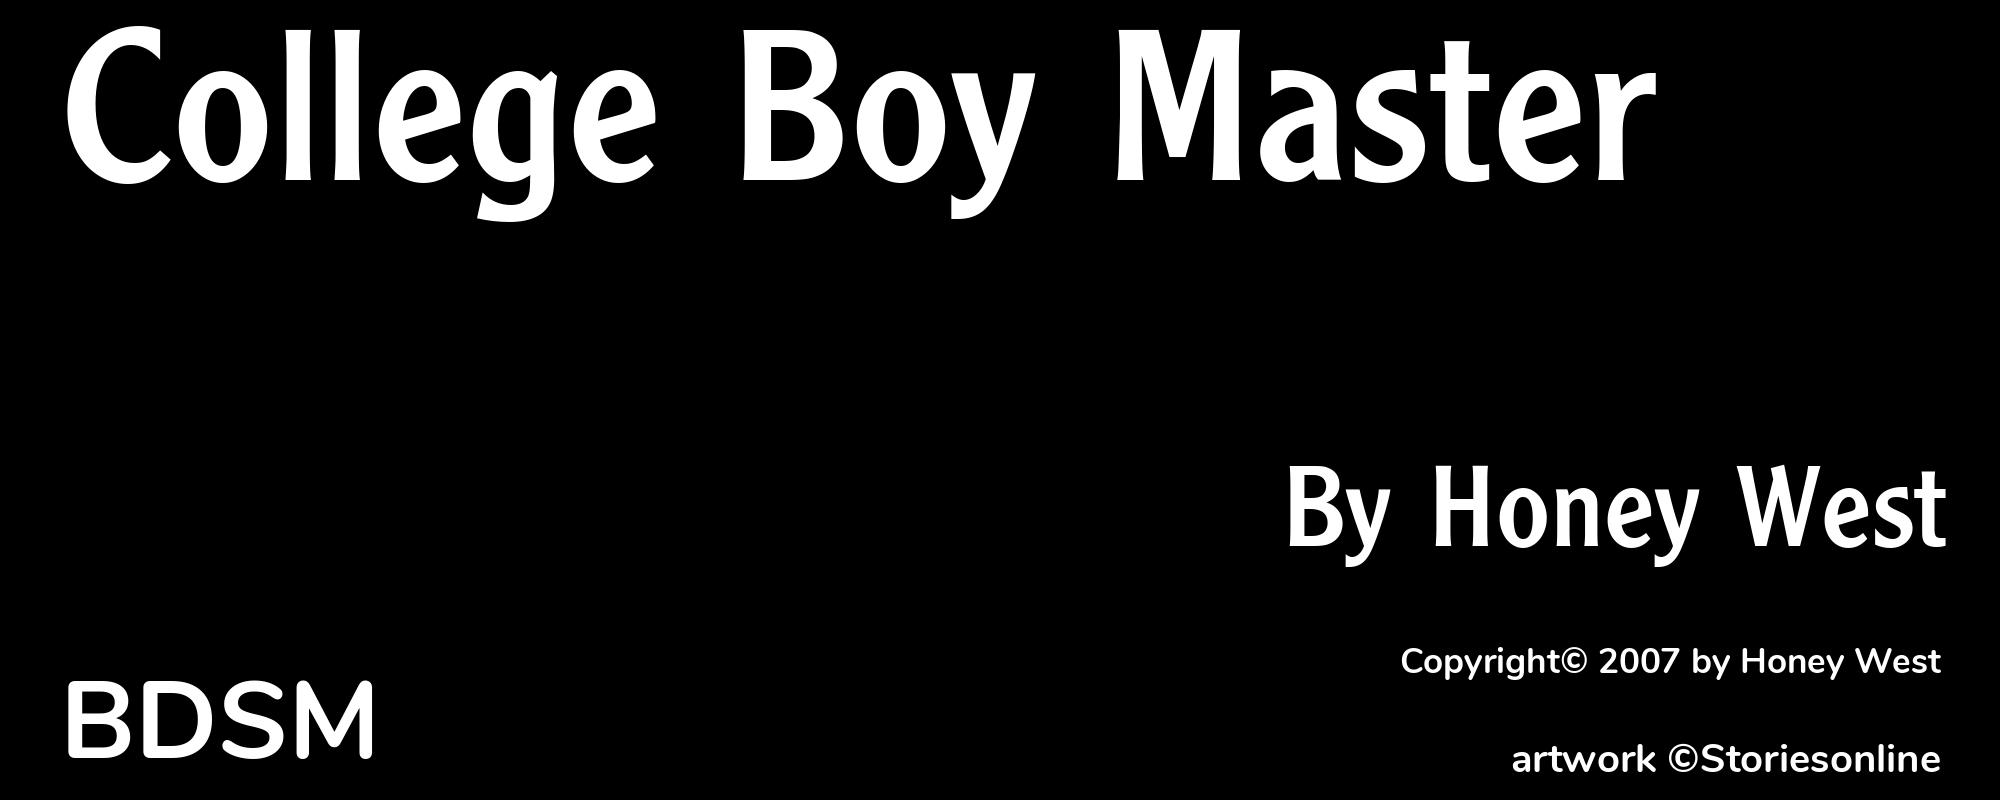 College Boy Master - Cover